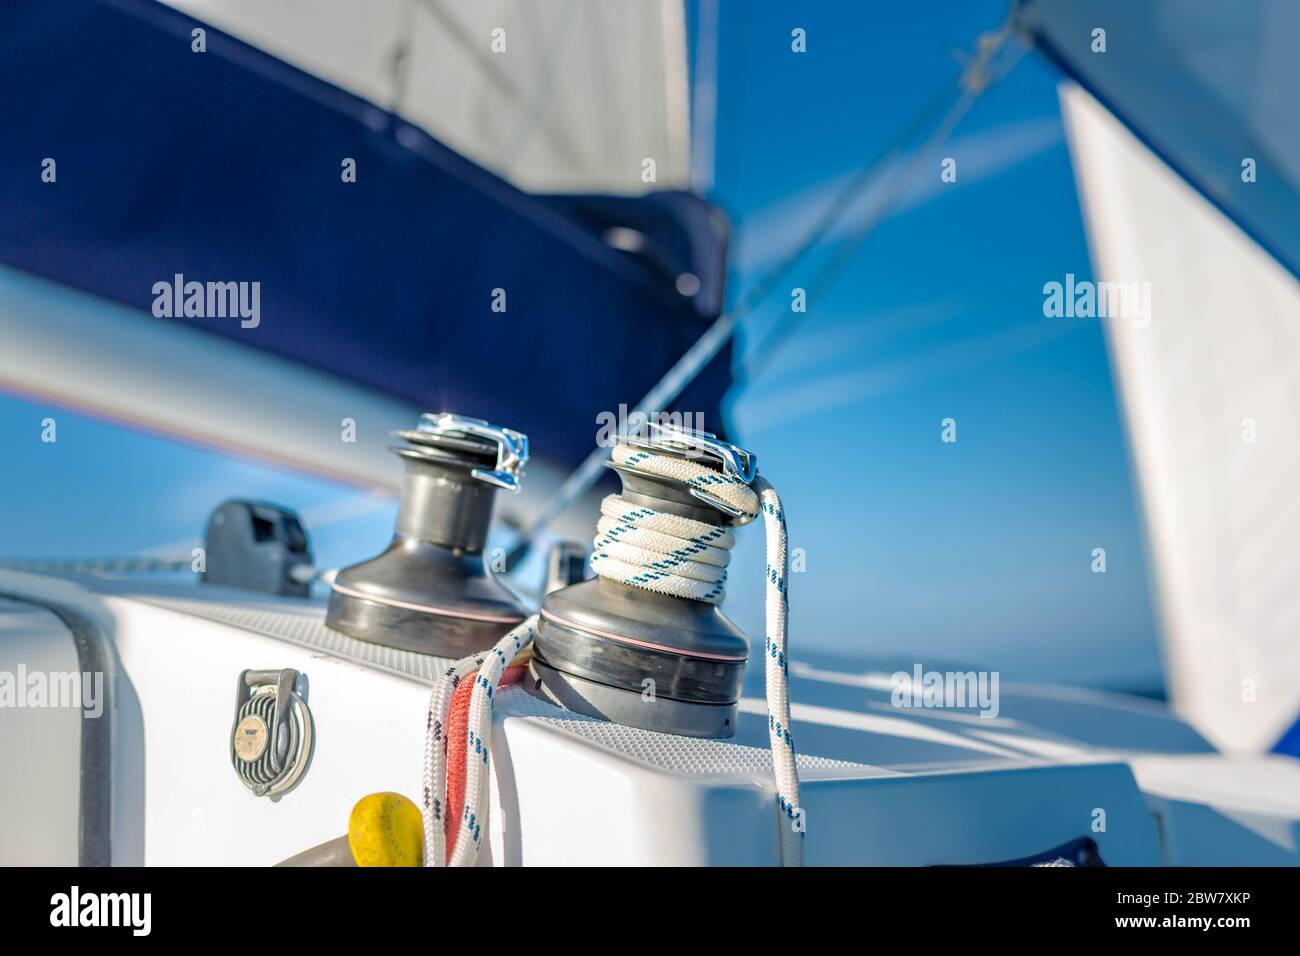 Sailboat winch and rope yacht detail. Yachting, winch with ropes on a sailboat while sailing Stock Photo